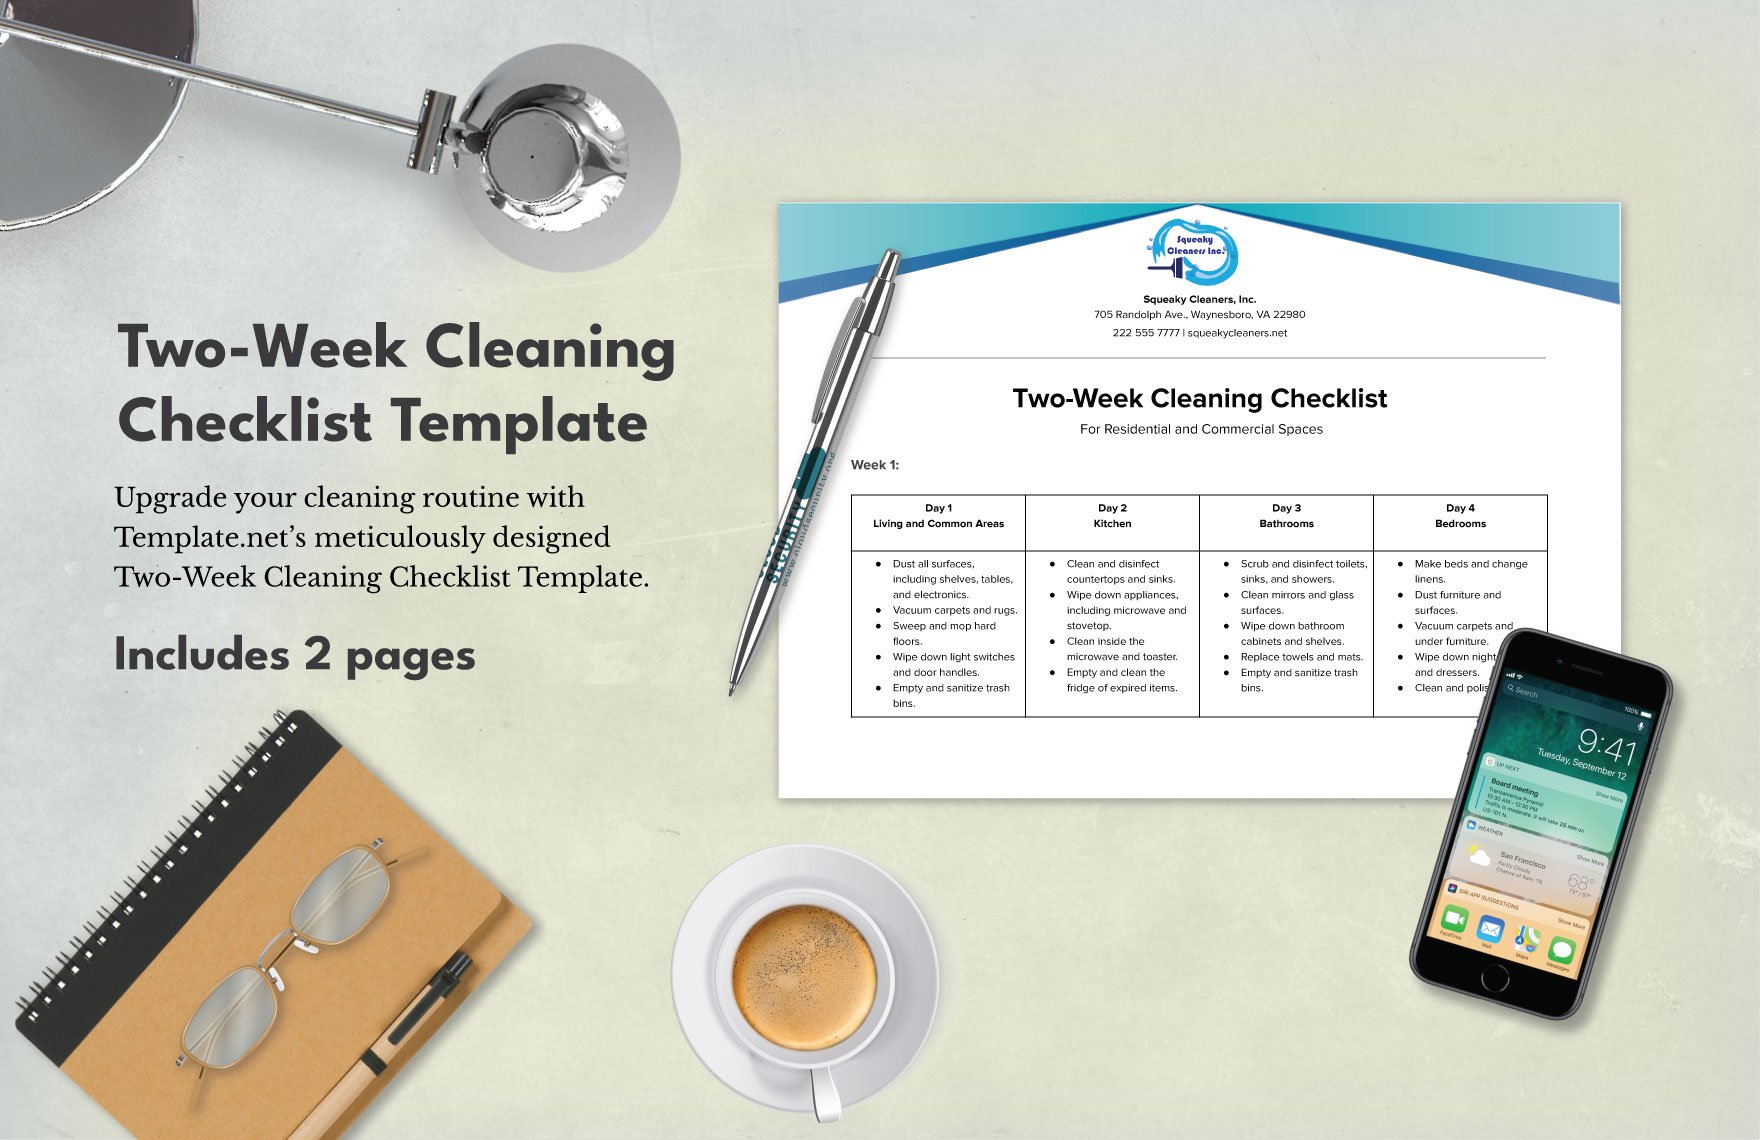 Two-Week Cleaning Checklist Template